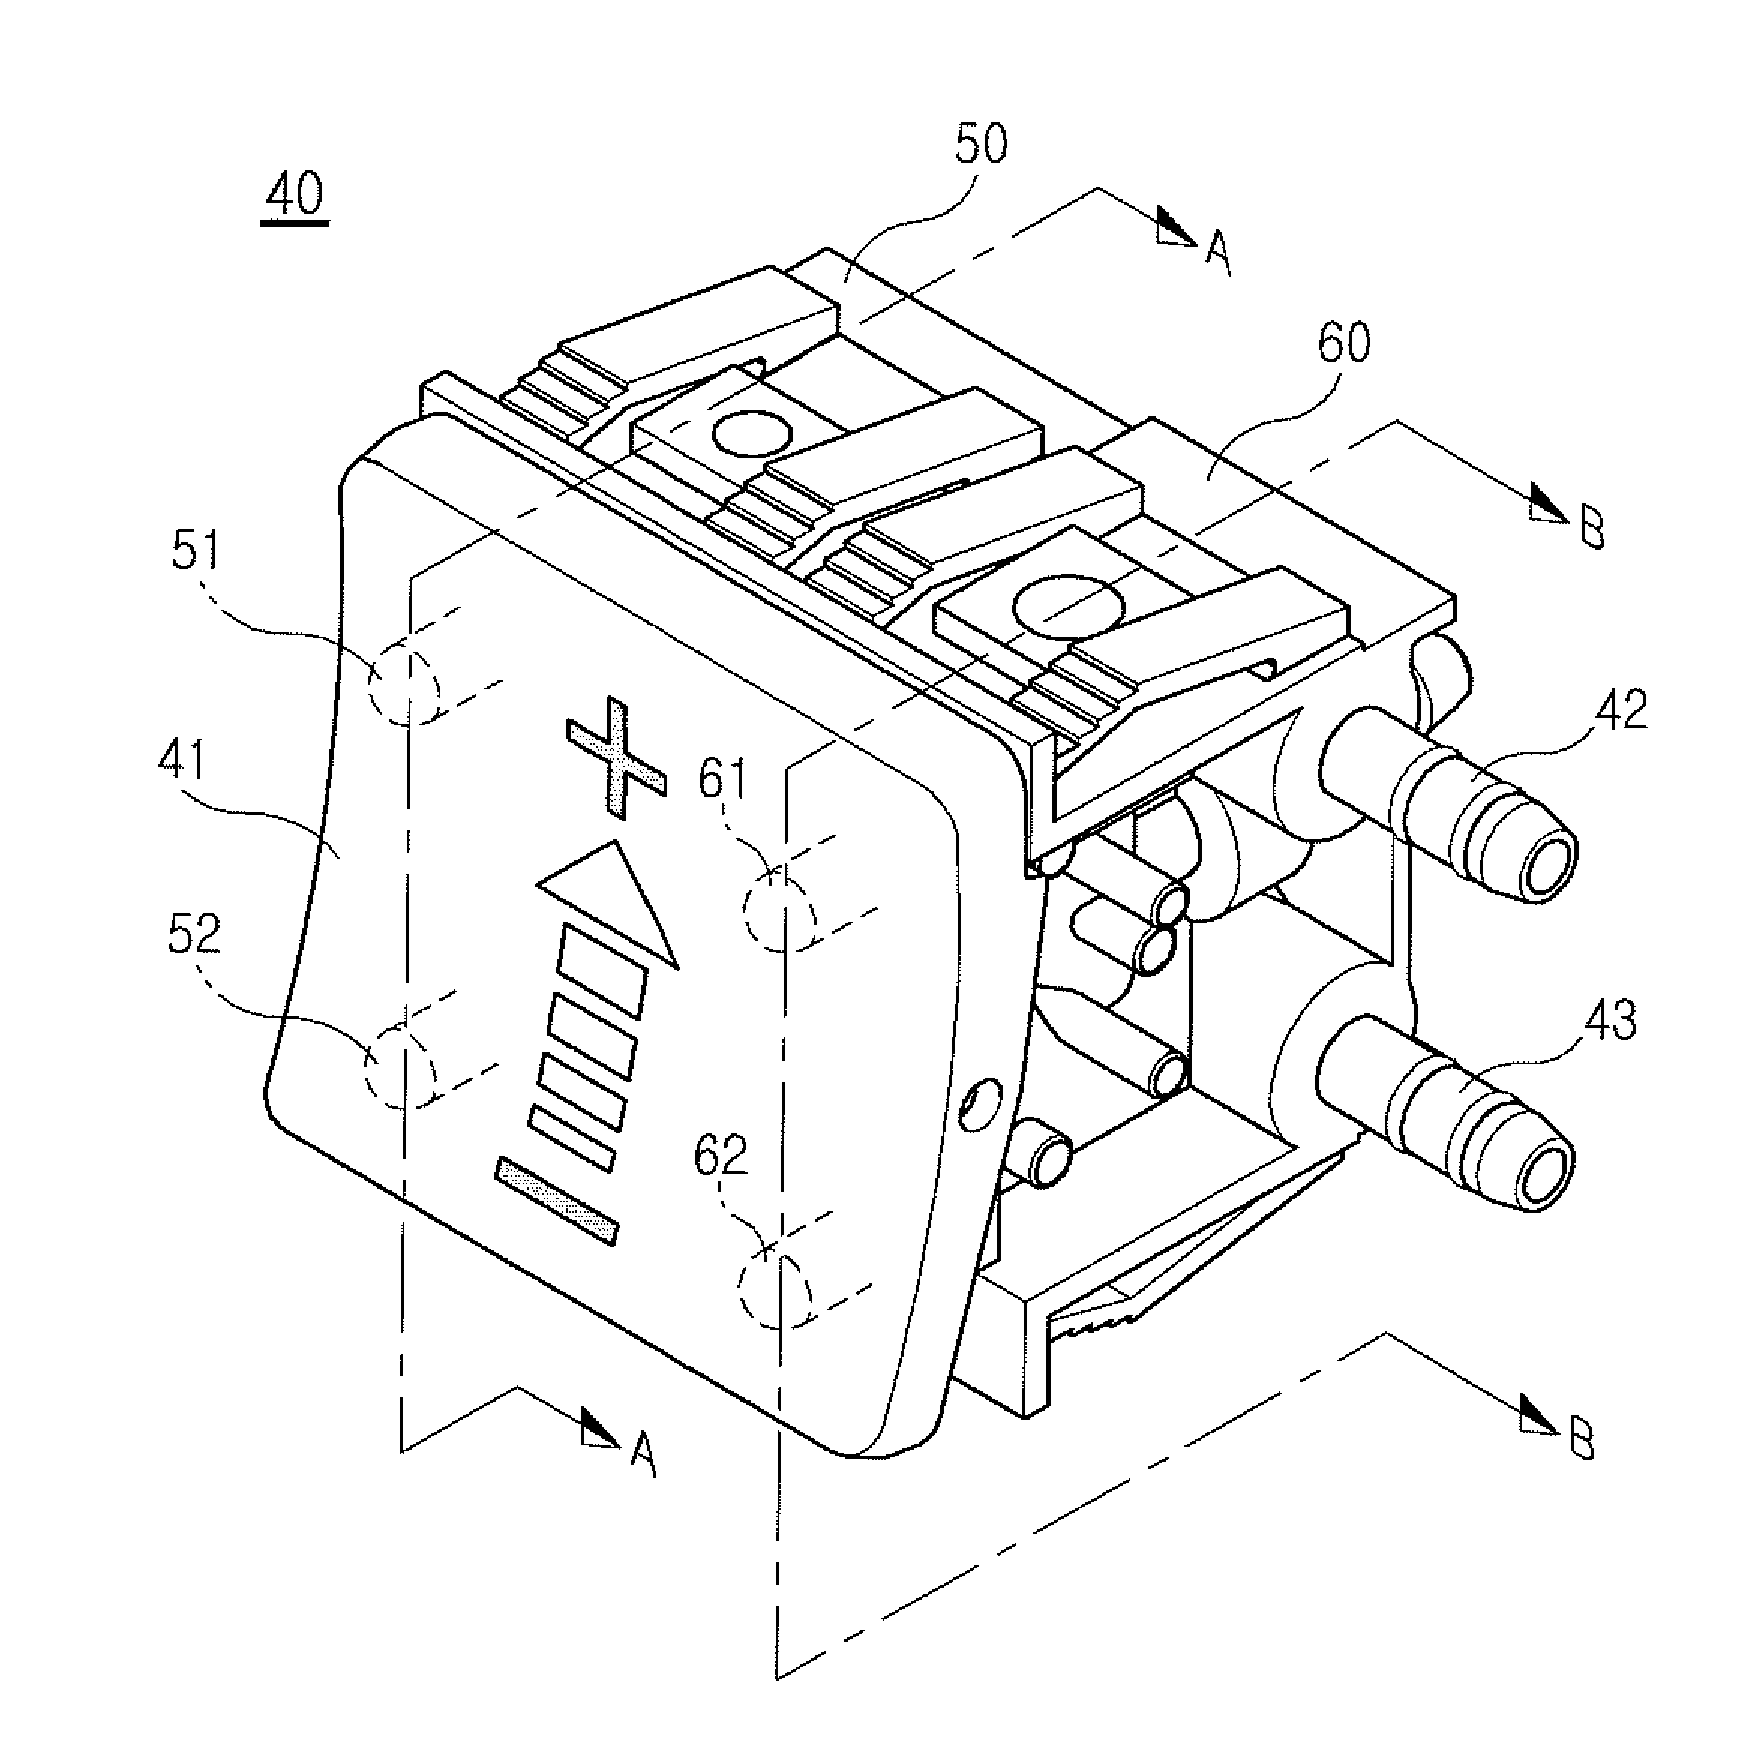 Valve-Intensive Button for Adjusting Height of Cushion Seat for Vehicle